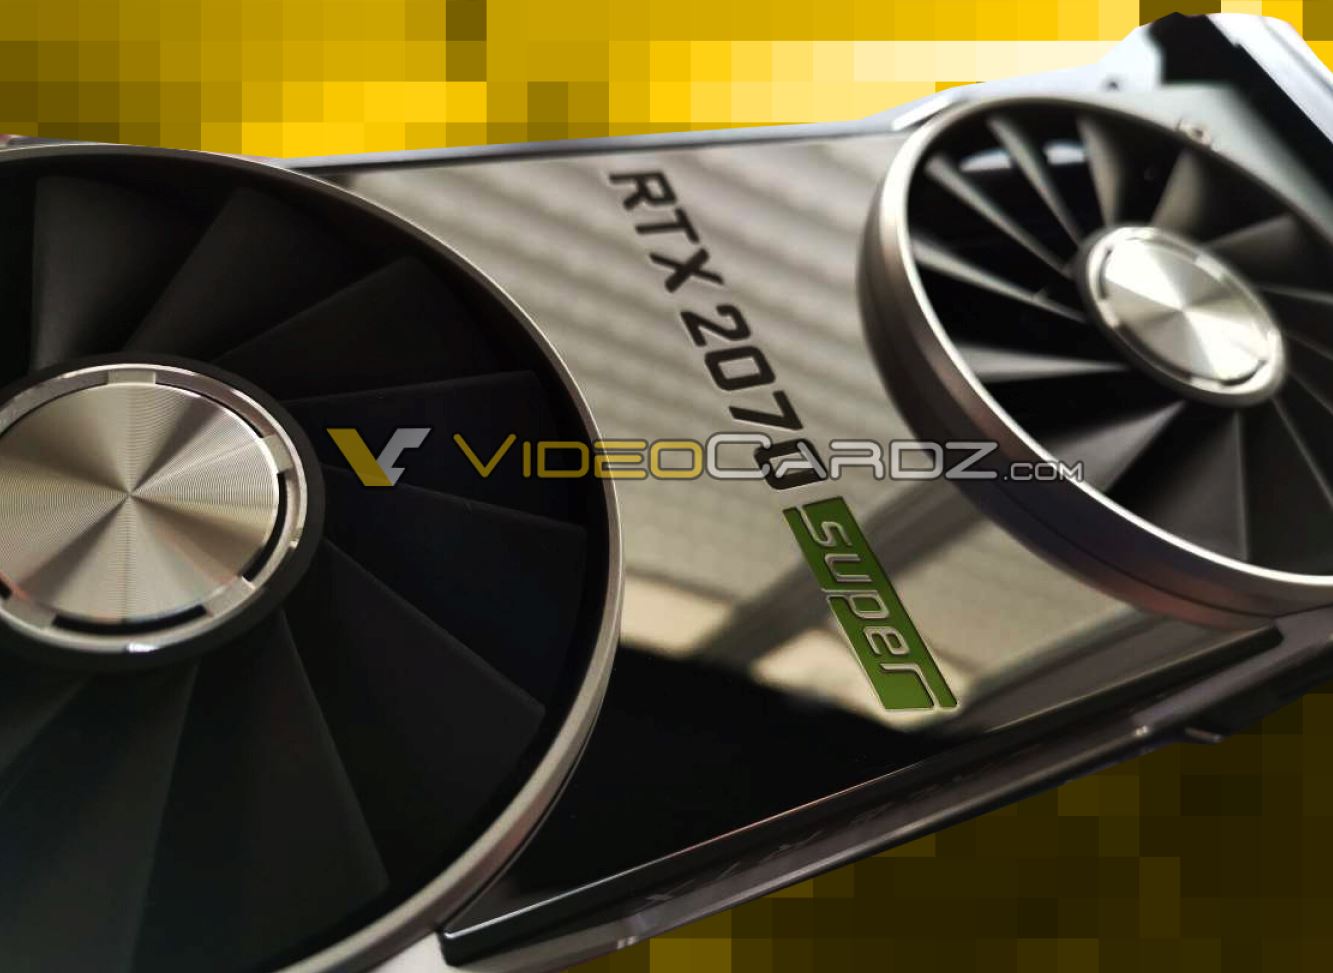 Media asset in full size related to 3dfxzone.it news item entitled as follows: Prima foto leaked della GeForce RTX 2070 SUPER Founders Edition di NVIDIA | Image Name: news29728_NVIDIA-GeForce-RTX-2070-SUPER-Founders-Edition_1.jpg